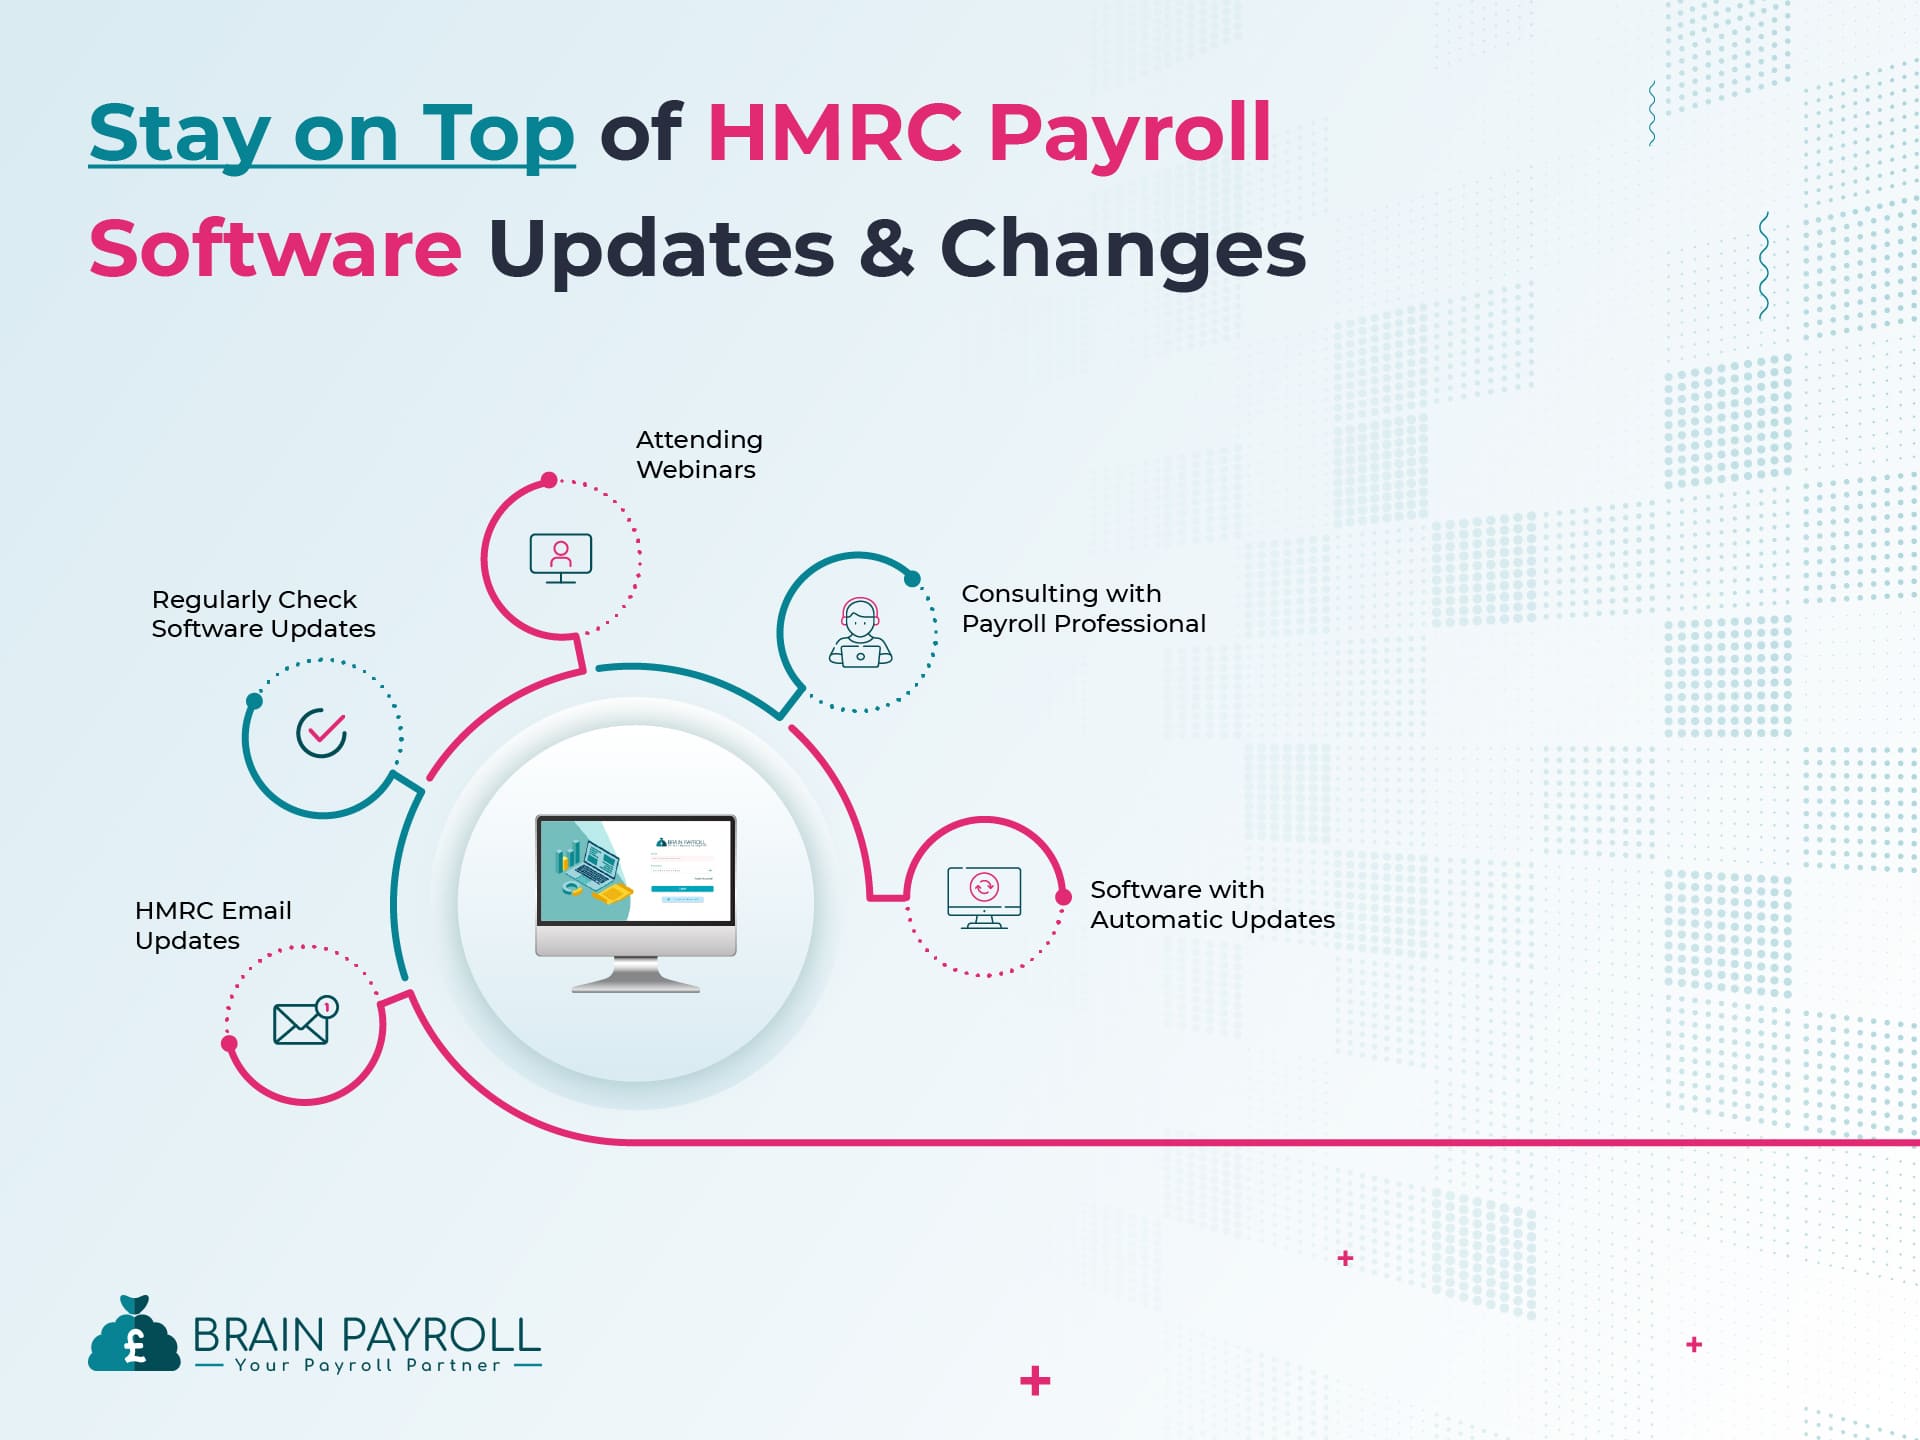 How to Stay on Top of HMRC Payroll Software Updates and Changes